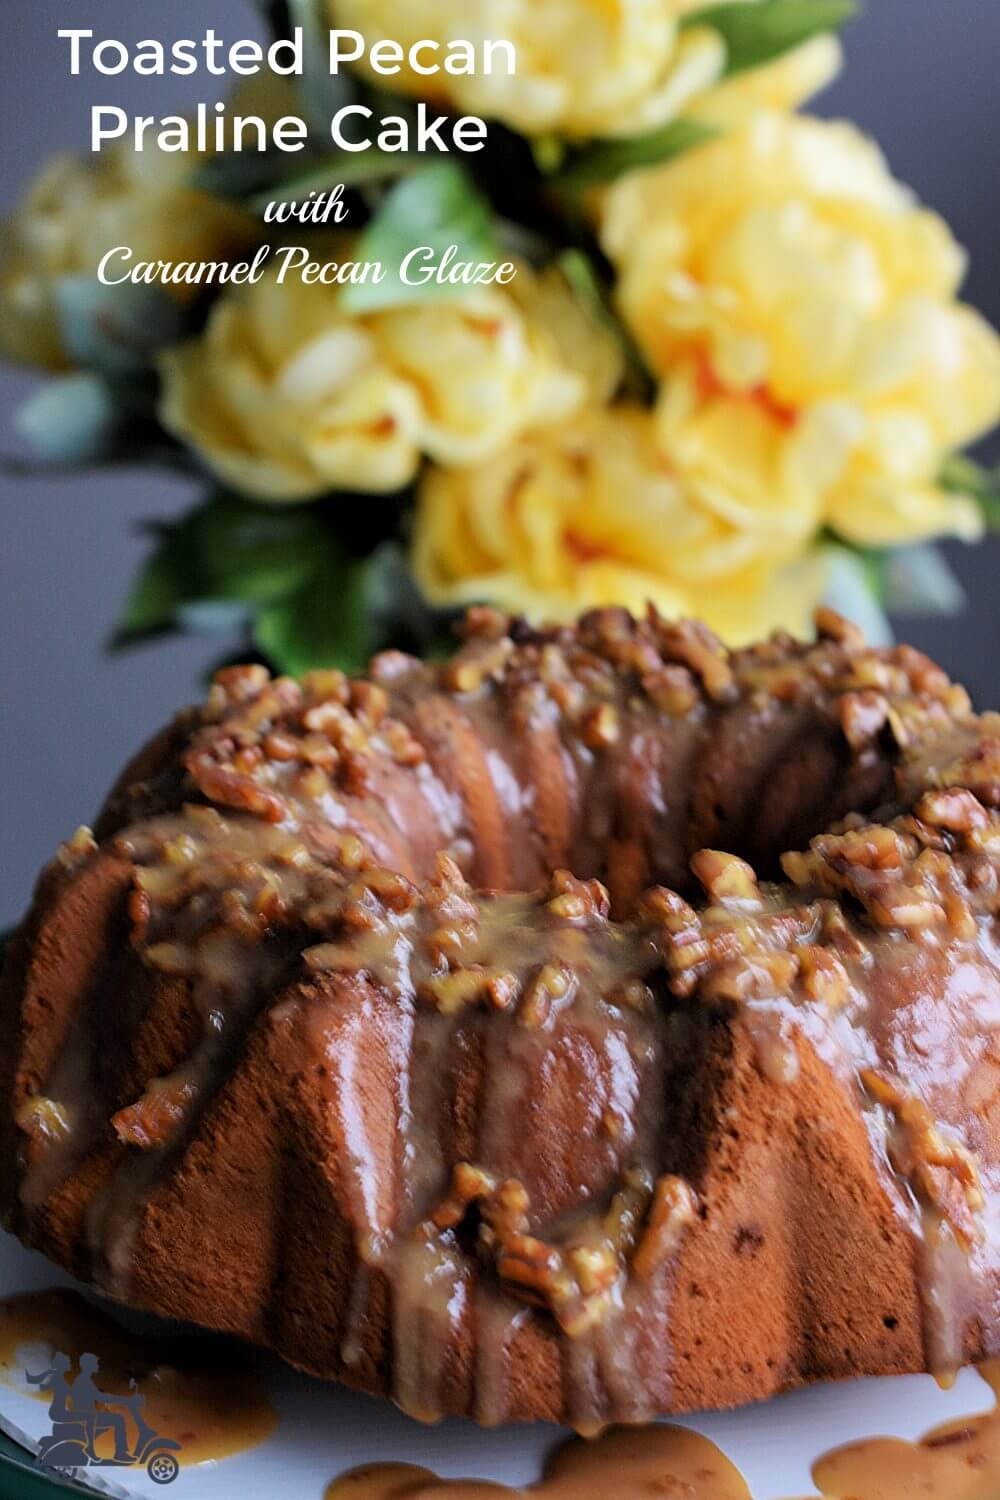 This is a butter rich pound cake that's soft and moist and studded with toasted pecans and heath bits. To finish it off we pour a caramel pecan glaze over it adding to the fantastic flavor. A cake that's an easy dessert to make but beautiful and flavorful so that it makes an occasion special.